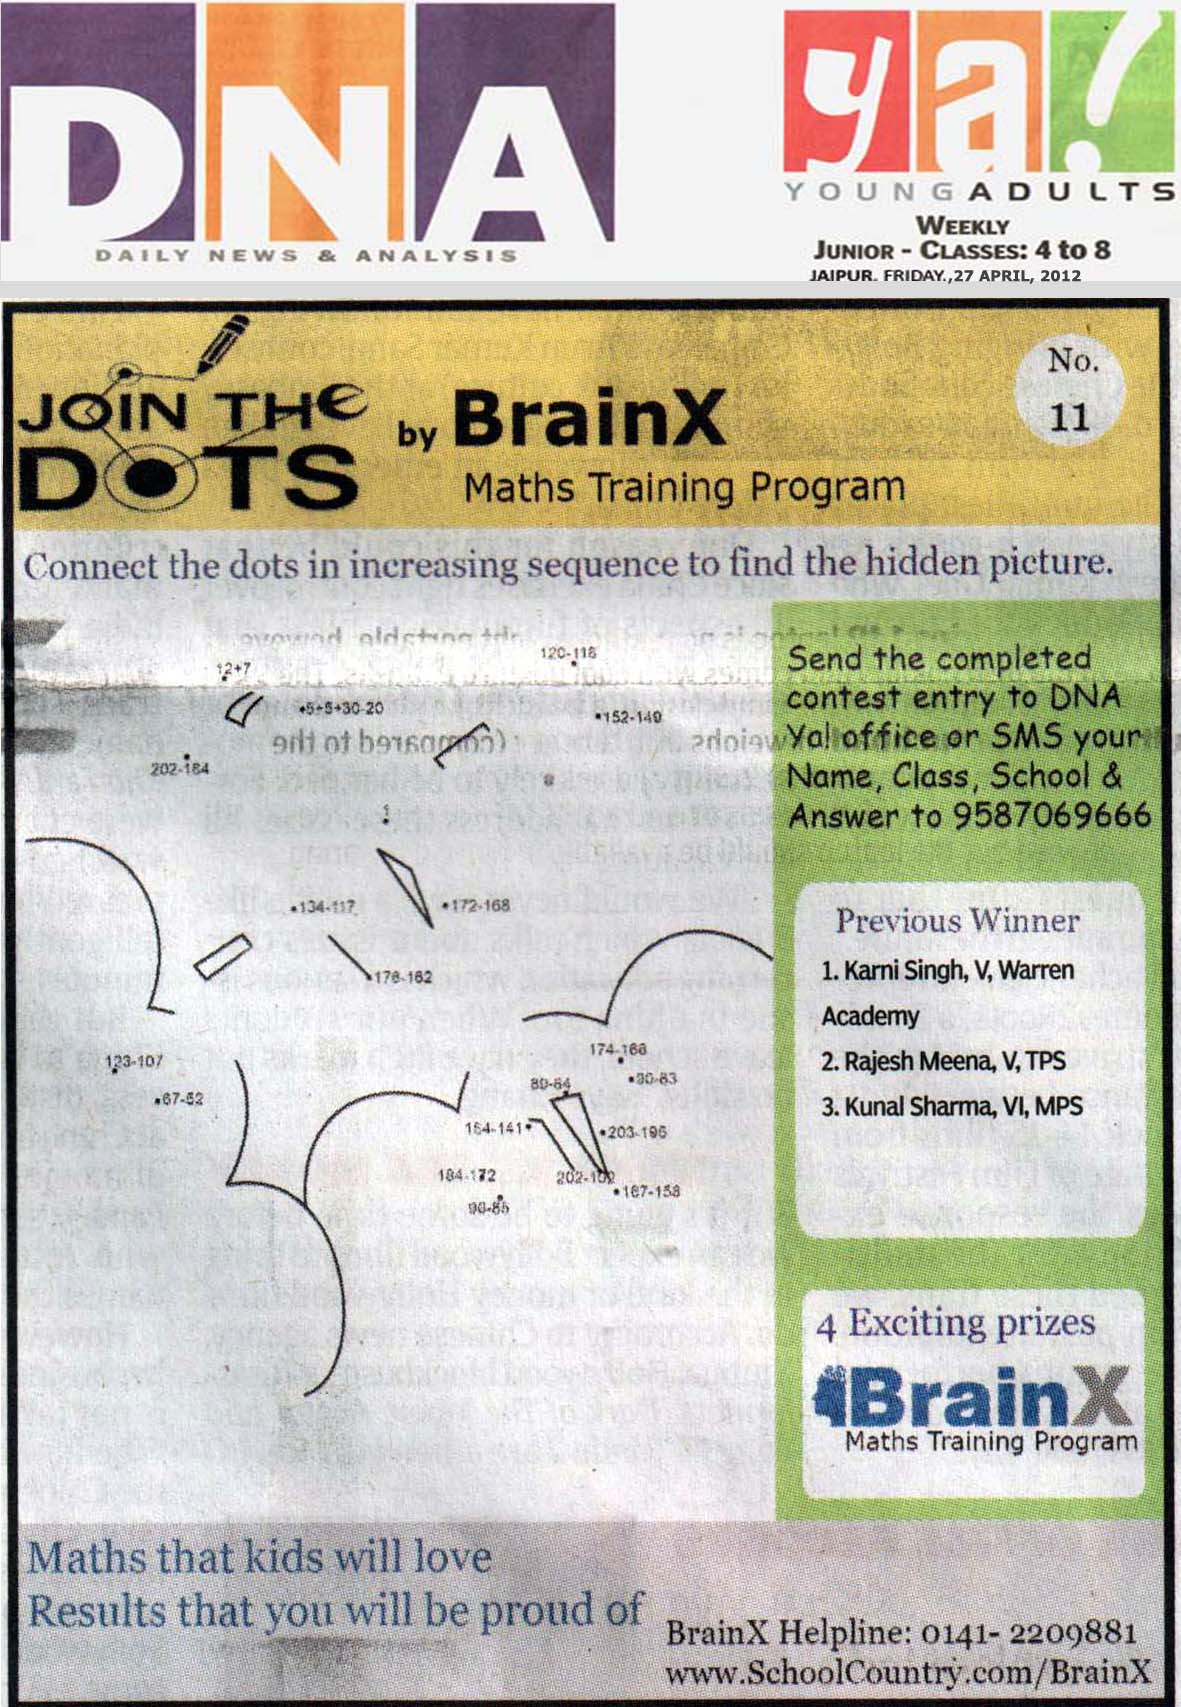 Number Singh Contest by BrainX Math Training Program published in DNA Ya! on 27-04-2012.